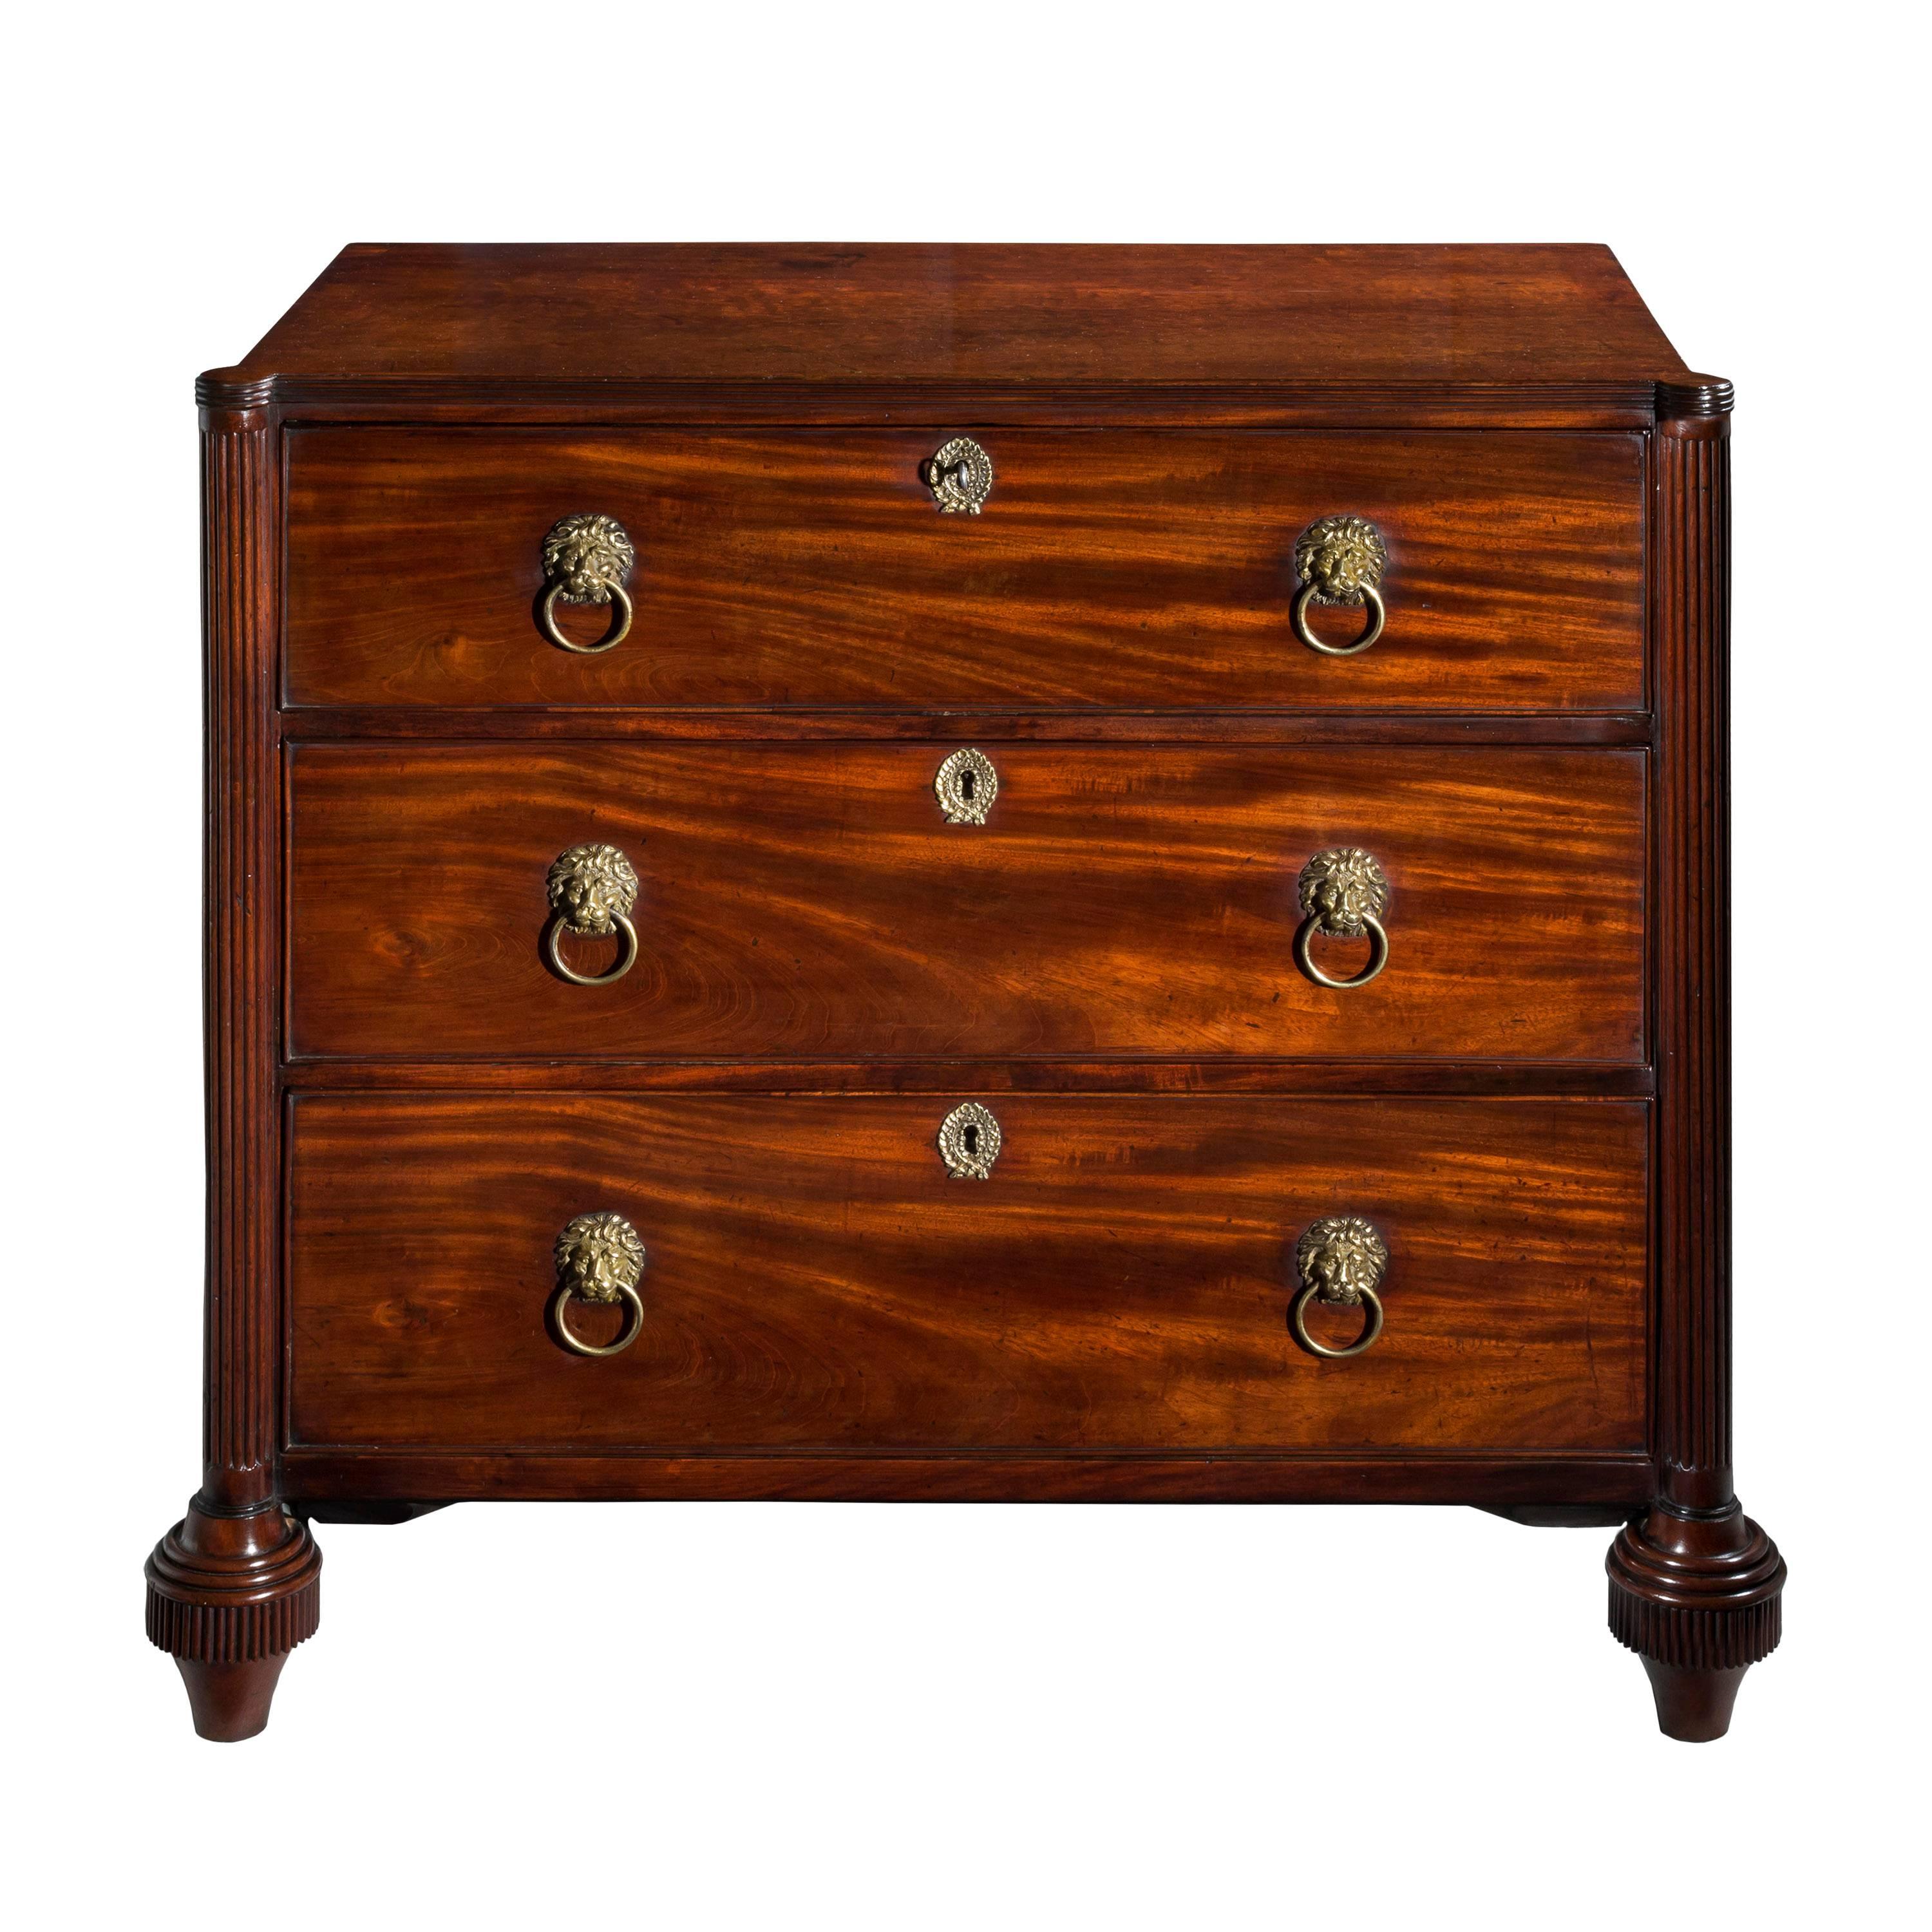 English 18th Century Mahogany Gillows Chest of Drawers